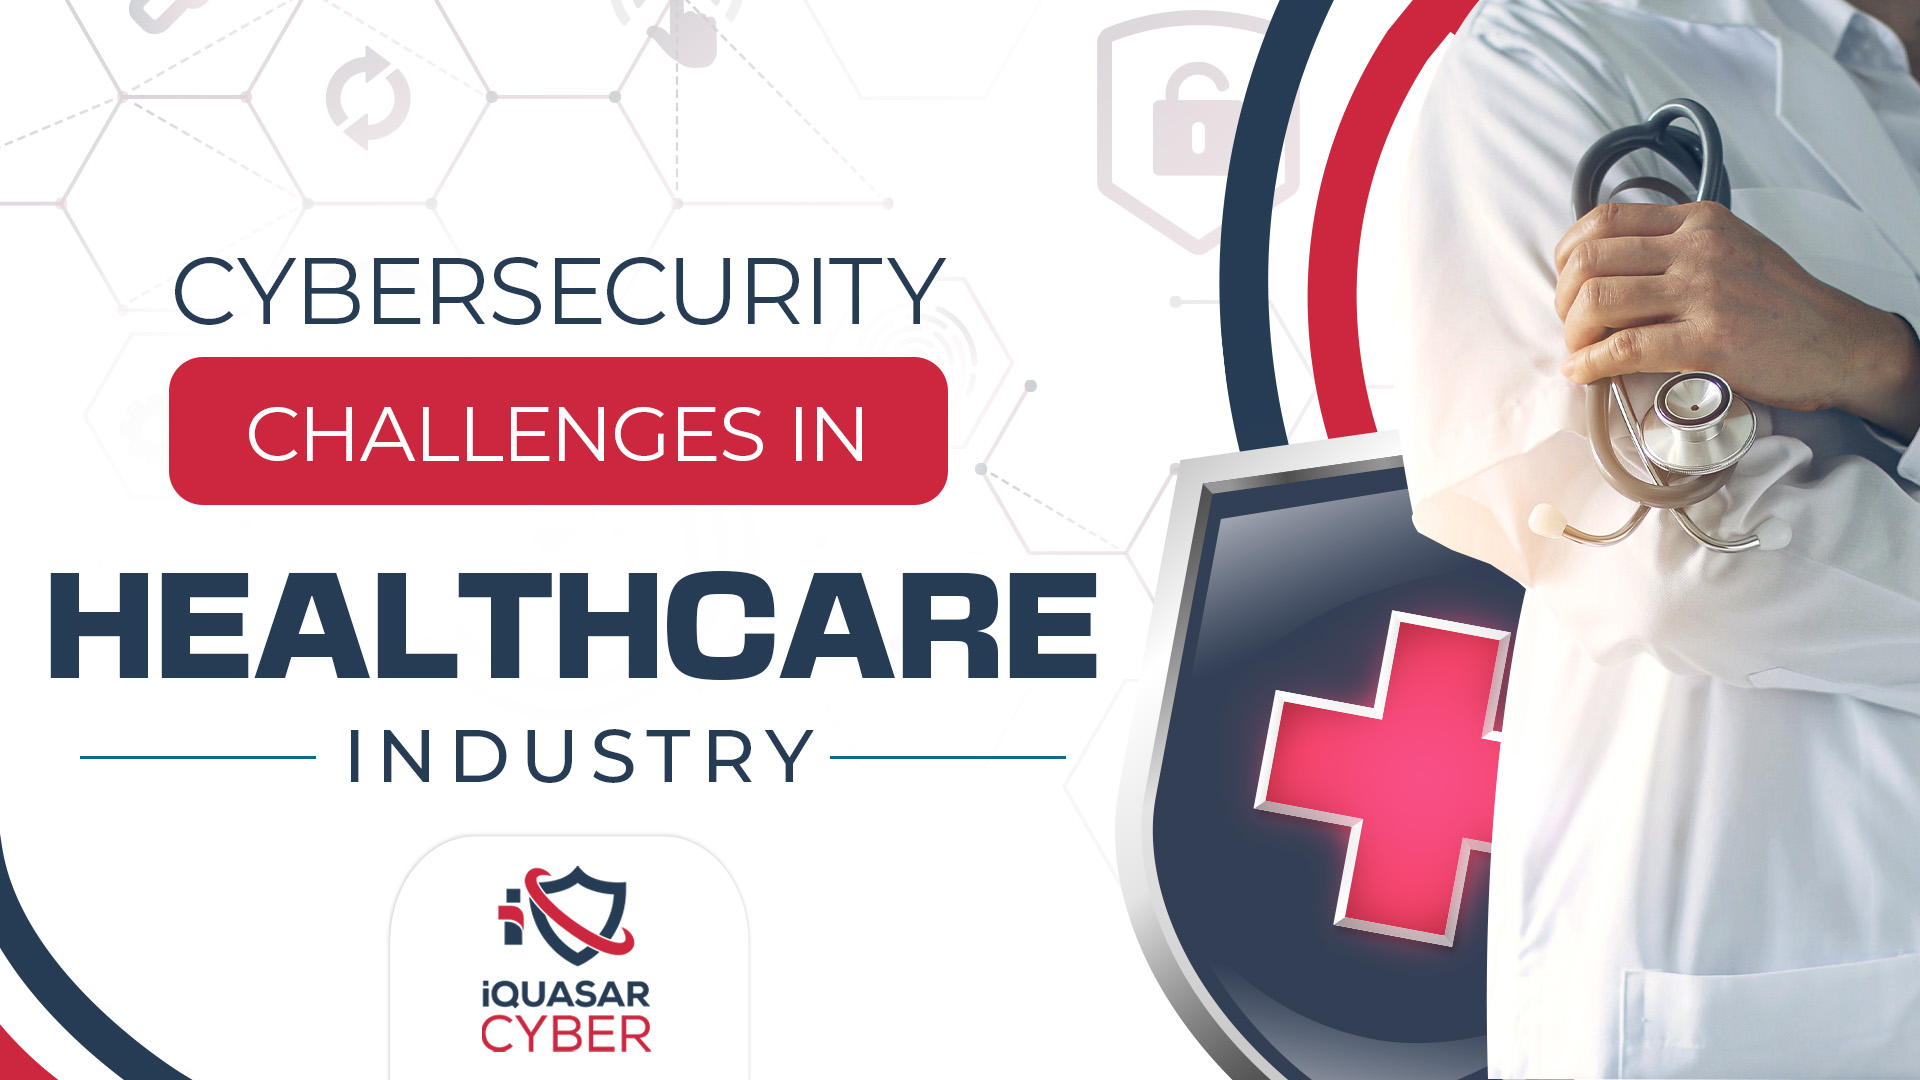 Cybersecurity challenges in healthcare industry